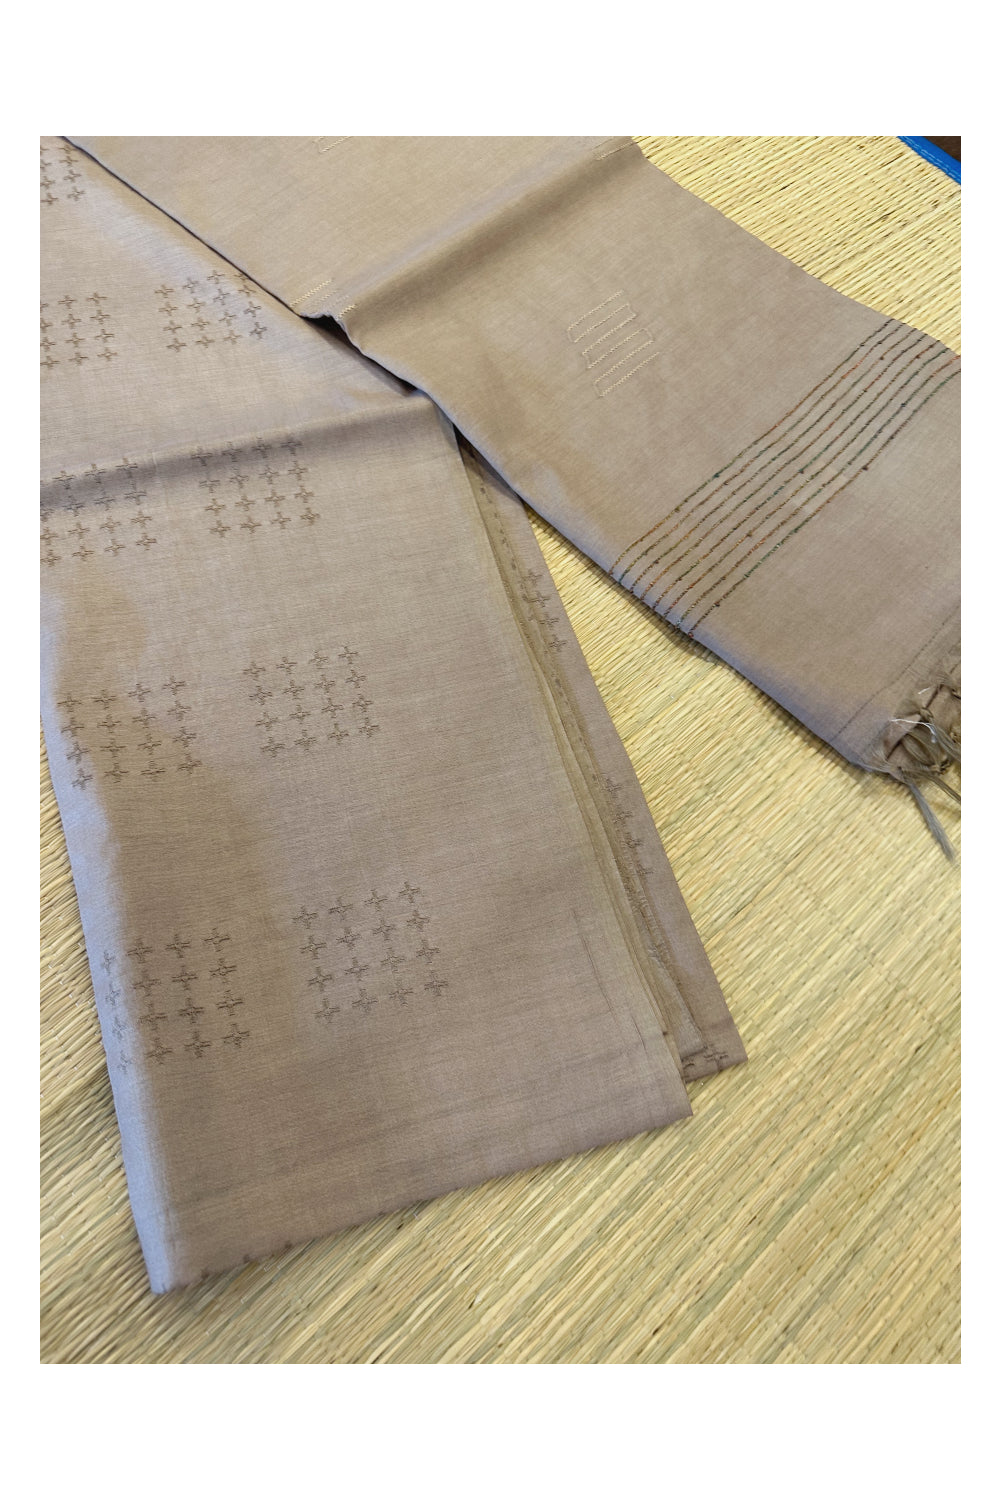 Southloom Pure Tussar Saree with Plain Body and Blouse Piece in Beige Brown